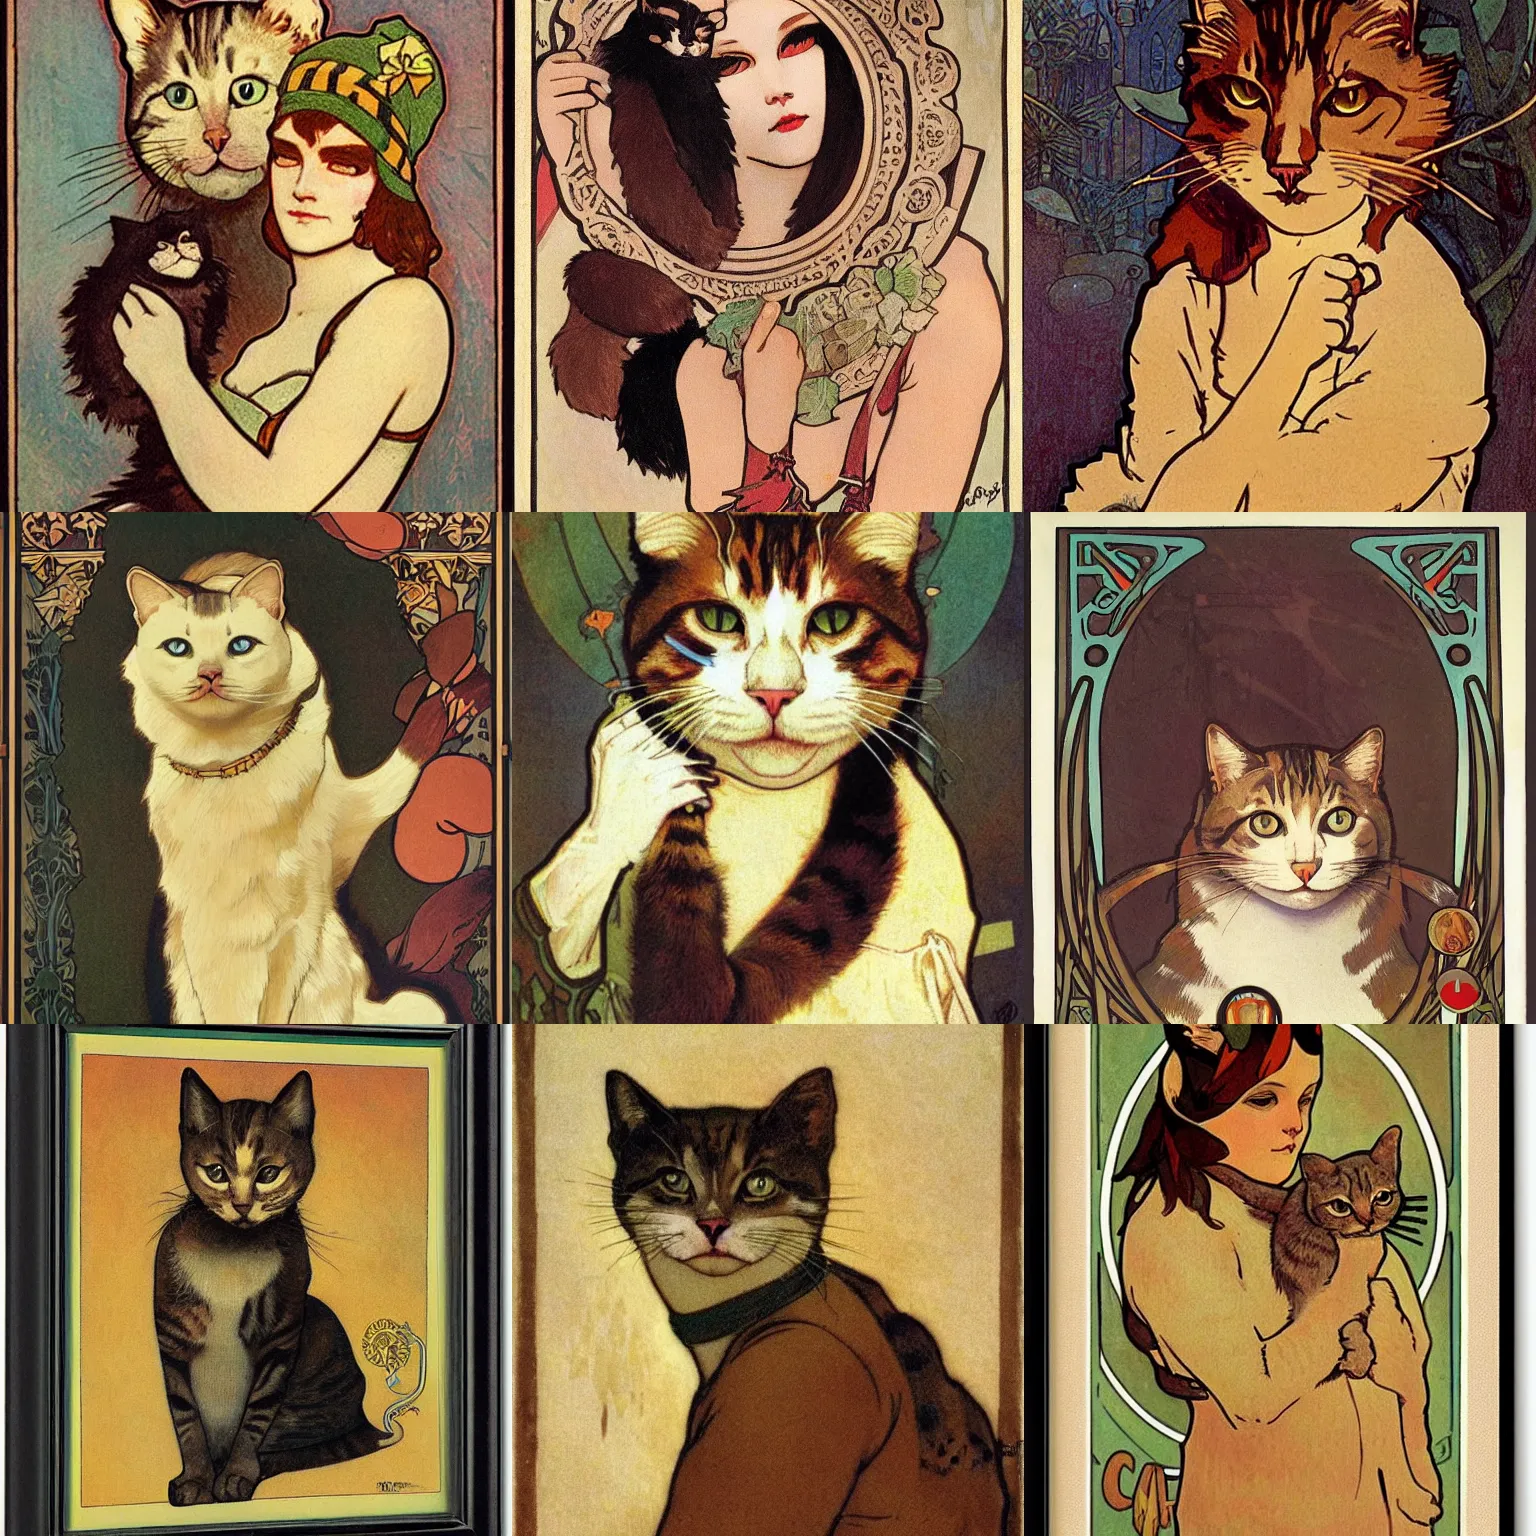 Prompt: cat furry with human face by Mucha